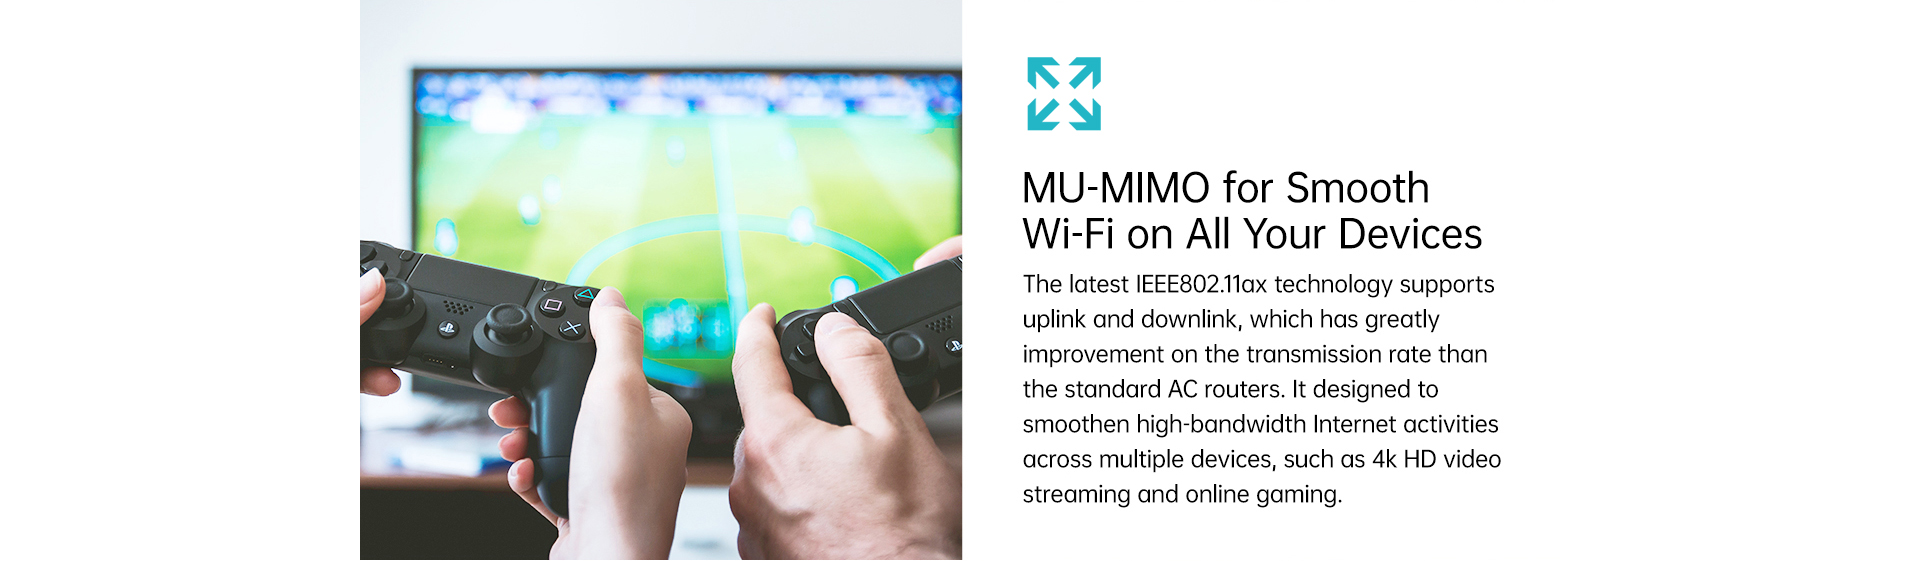 MIMO Wi-Fi Router